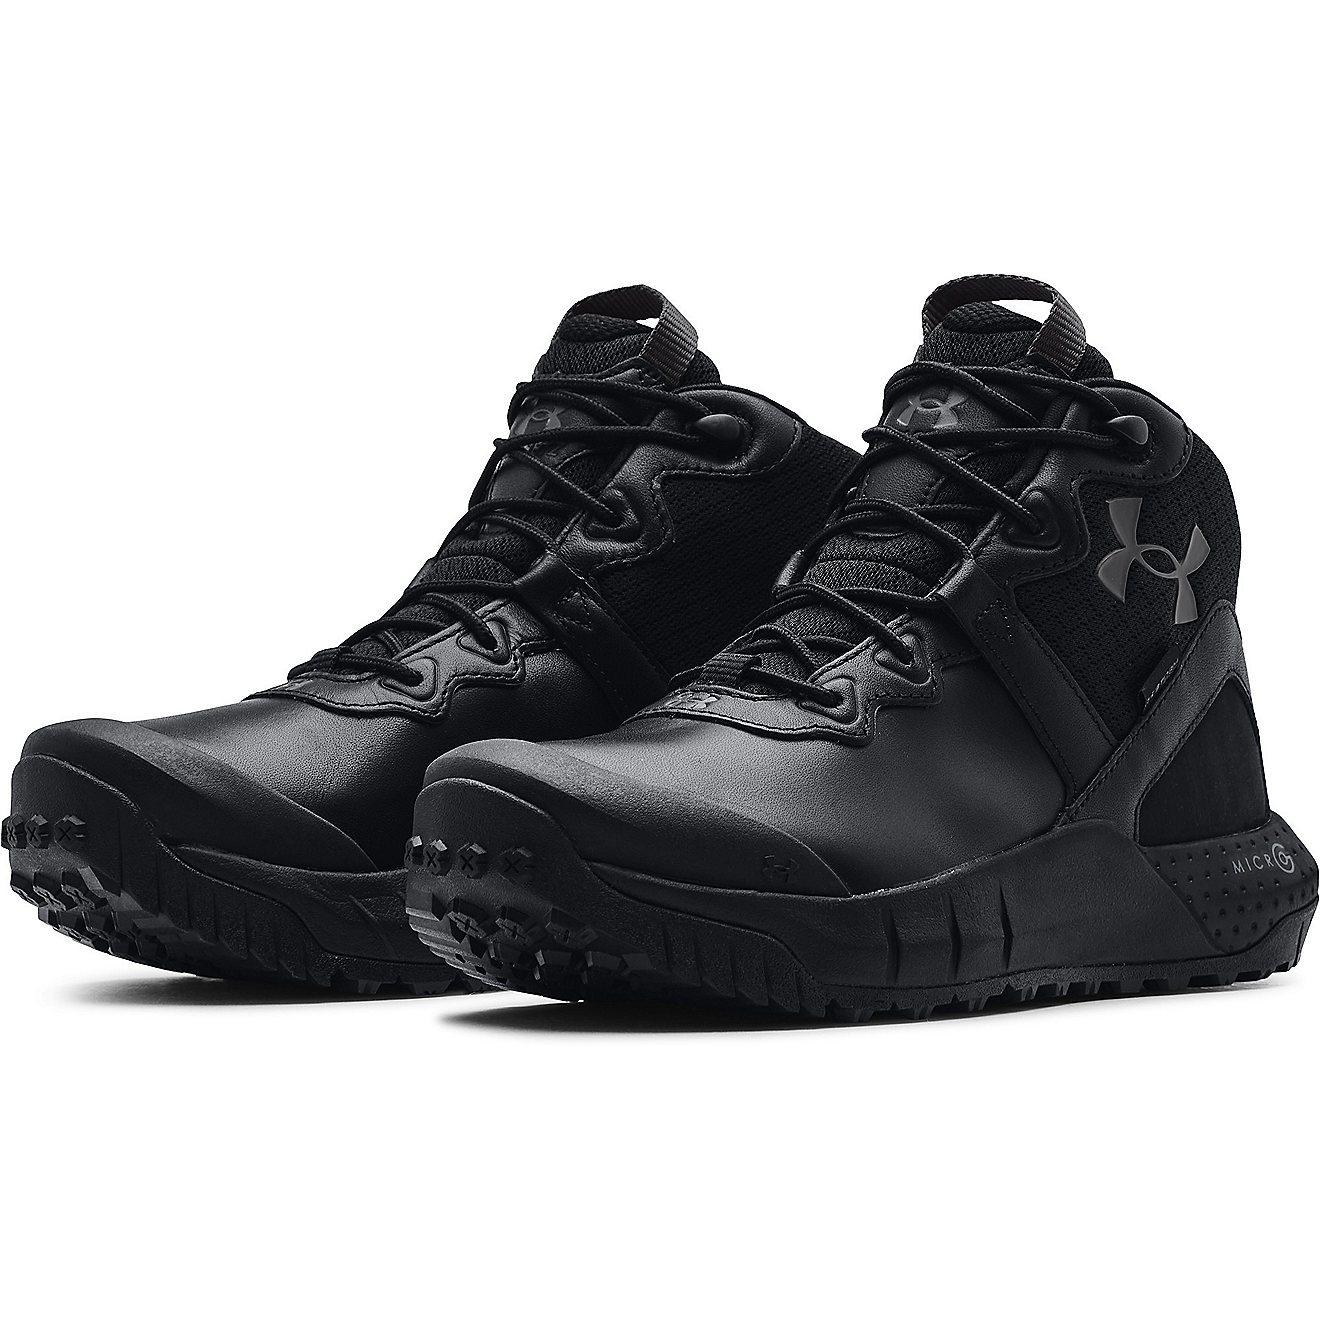 Under Armour Women's Micro G Valsetz Mid Leather Waterproof Tactical Boots                                                       - view number 3